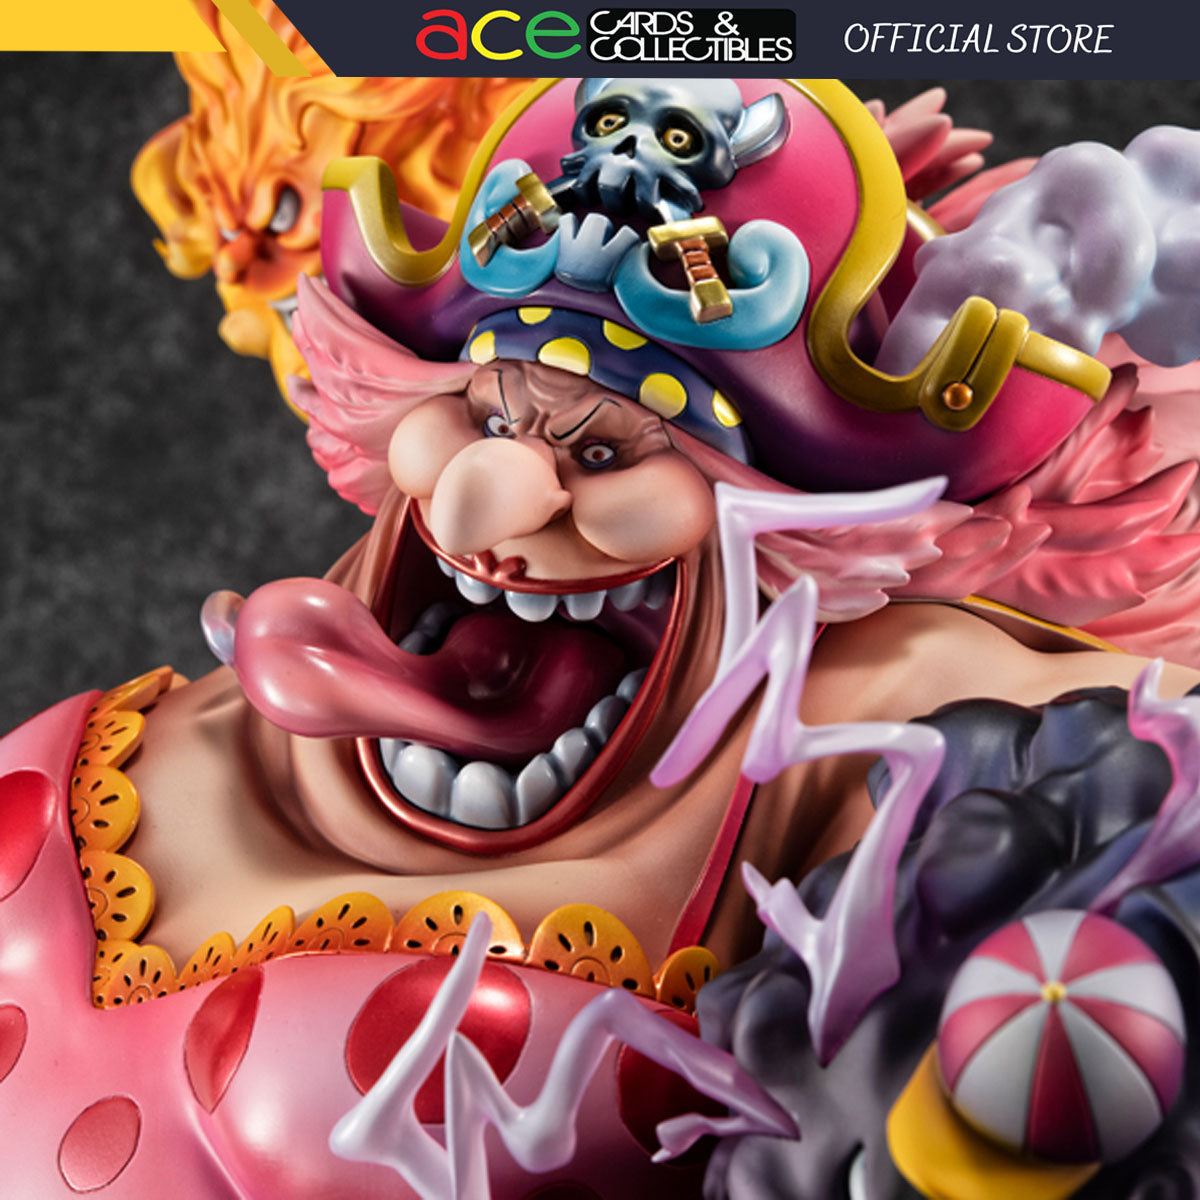 One Piece Portrait.Of.Pirates: SA-MAXIMUM Great Pirate "Big Mom-Charlotte Linlin"-MegaHouse-Ace Cards & Collectibles